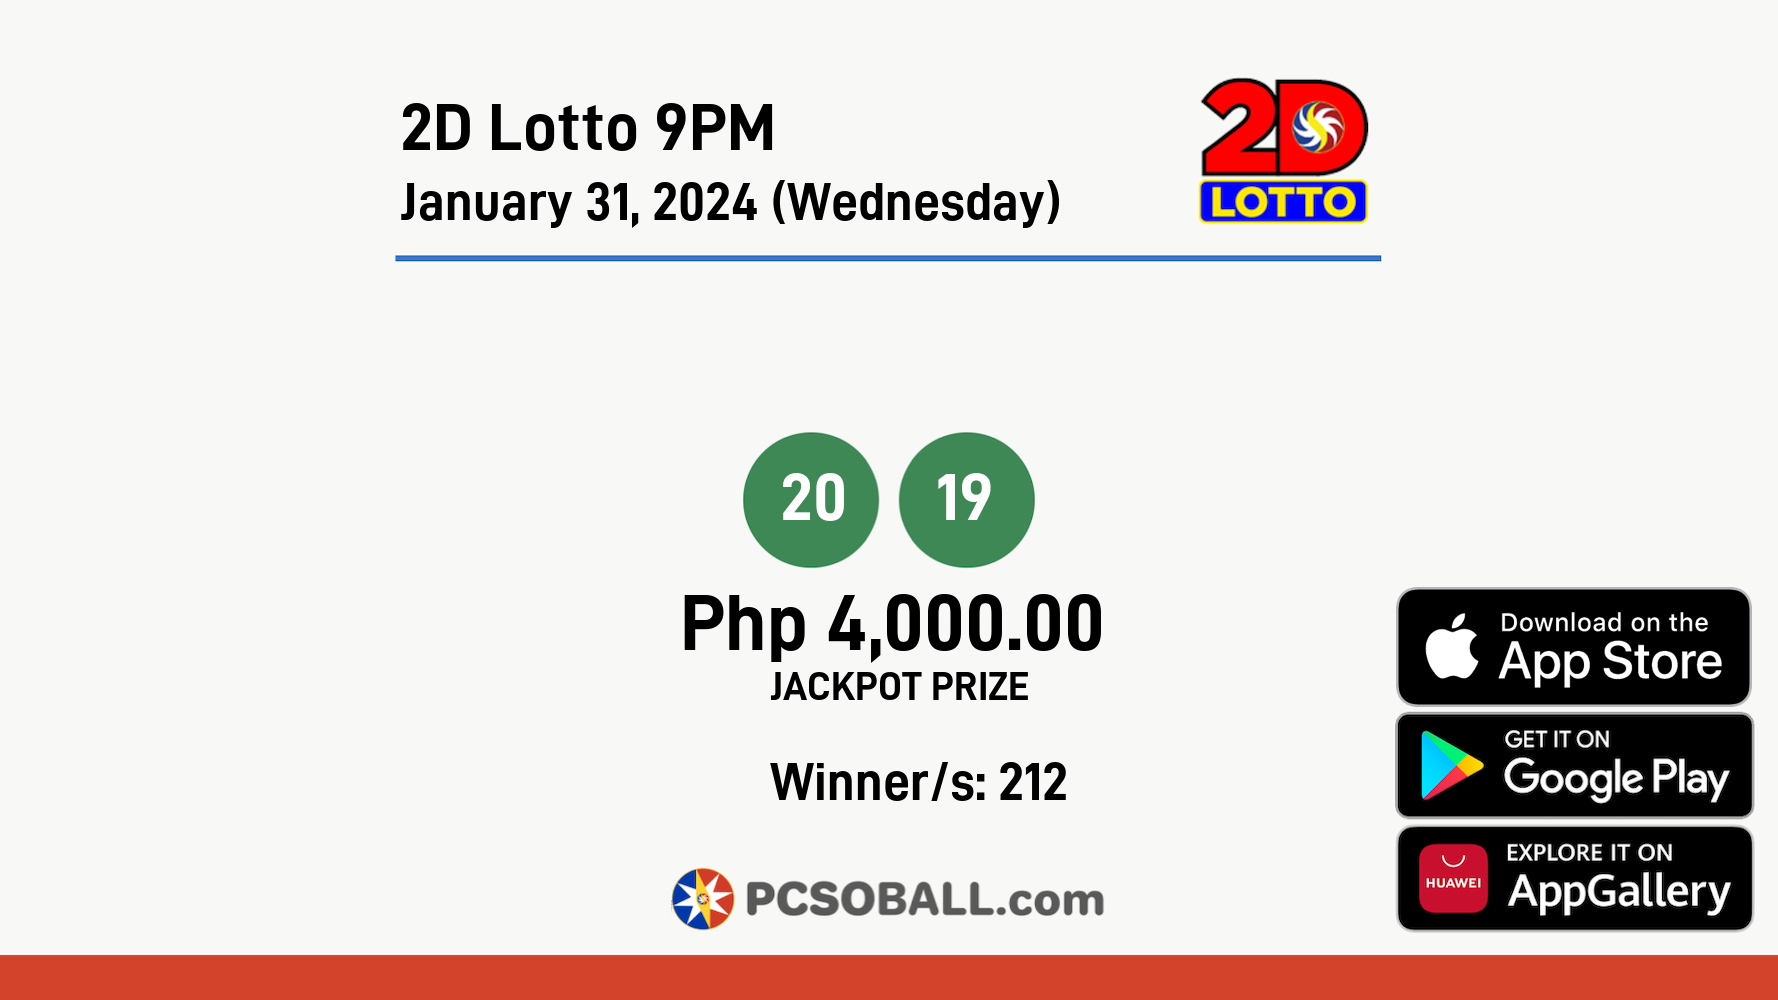 2D Lotto 9PM January 31, 2024 (Wednesday) Result